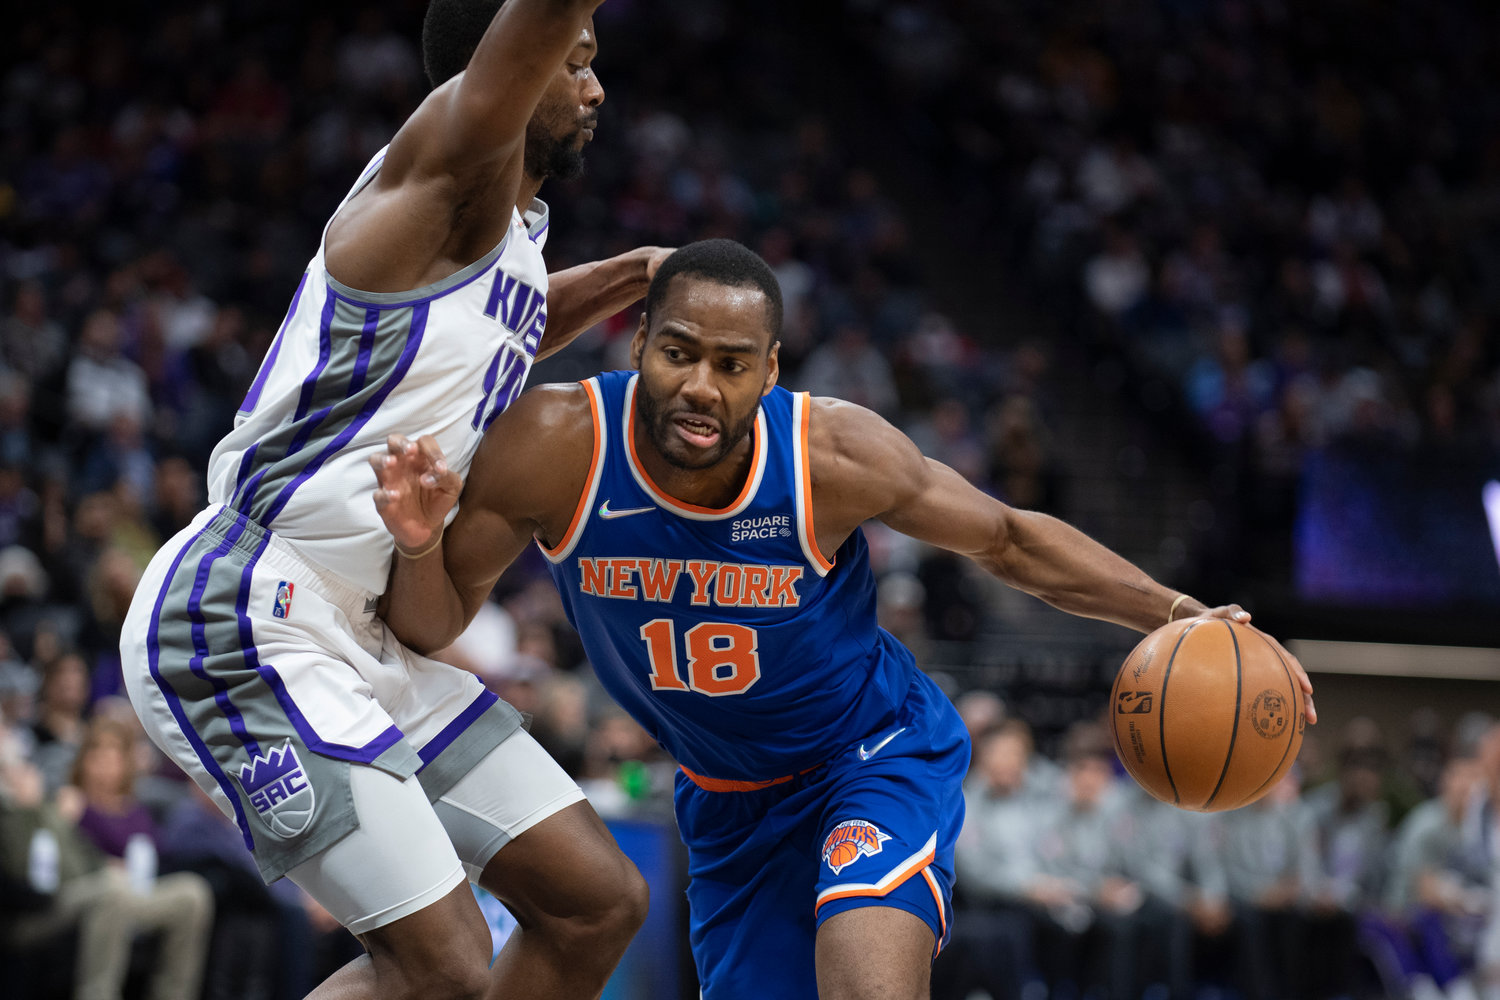 New York Knicks guard Alec Burks, right, is defended by Sacramento Kings forward Harrison Barnes in the first quarter in Sacramento, Calif., on March 7. The Knicks are trading Burks Nerlens Noel to the Detroit Pistons, a person with knowledge of the details said Tuesday, moves that free up nearly $20 million more for free agency.